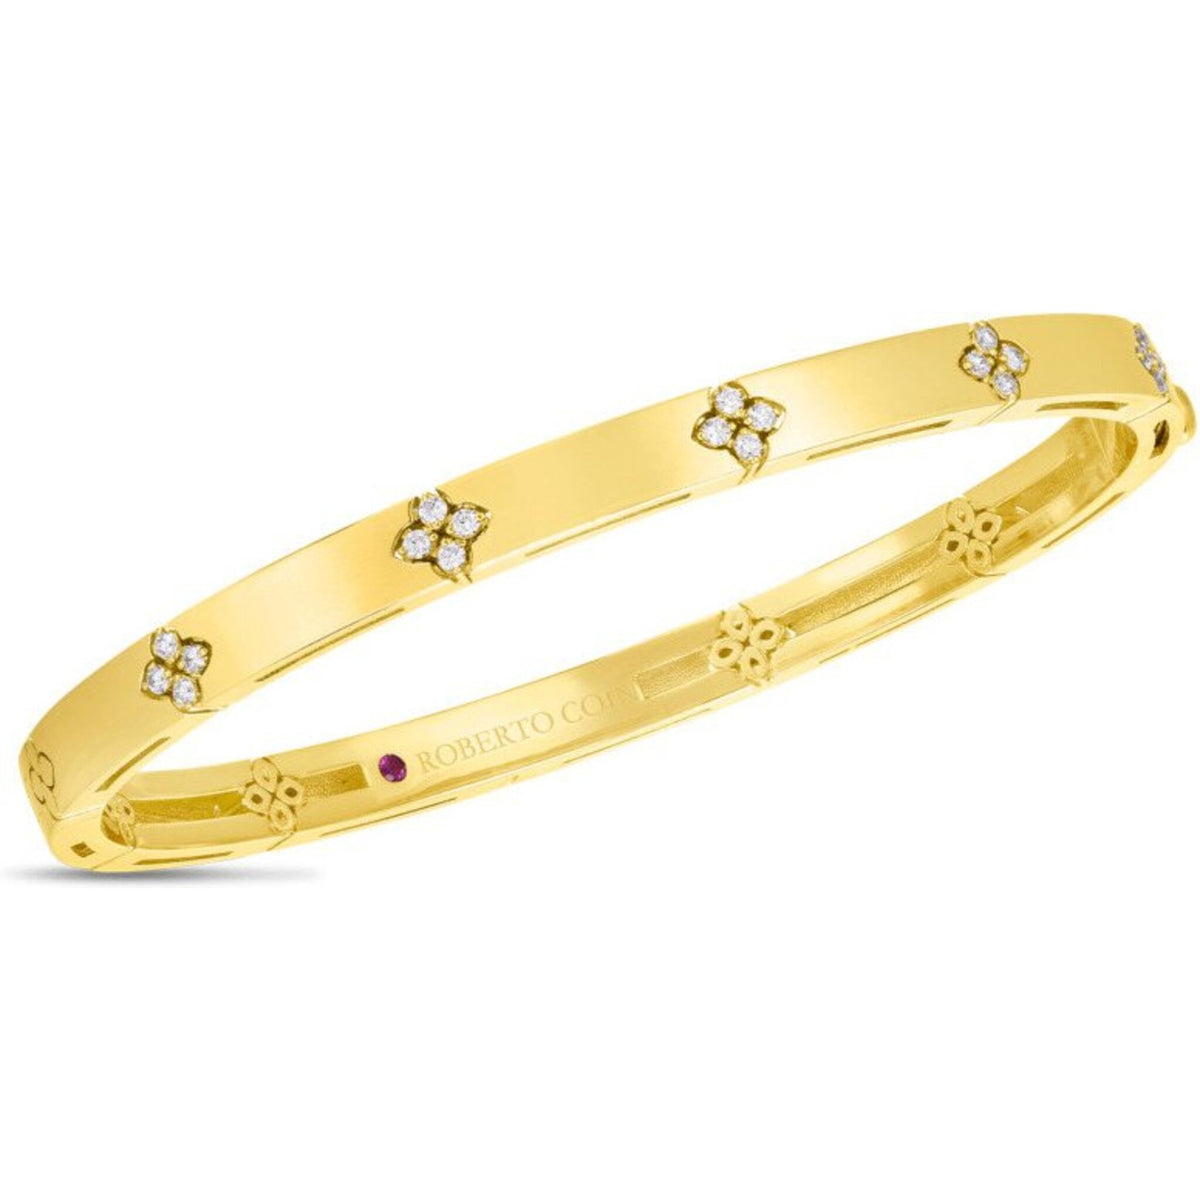 Roberto Coin - Love in Verona Narrow Width Flower Bangle in 18K Yellow Gold with Diamond Accents